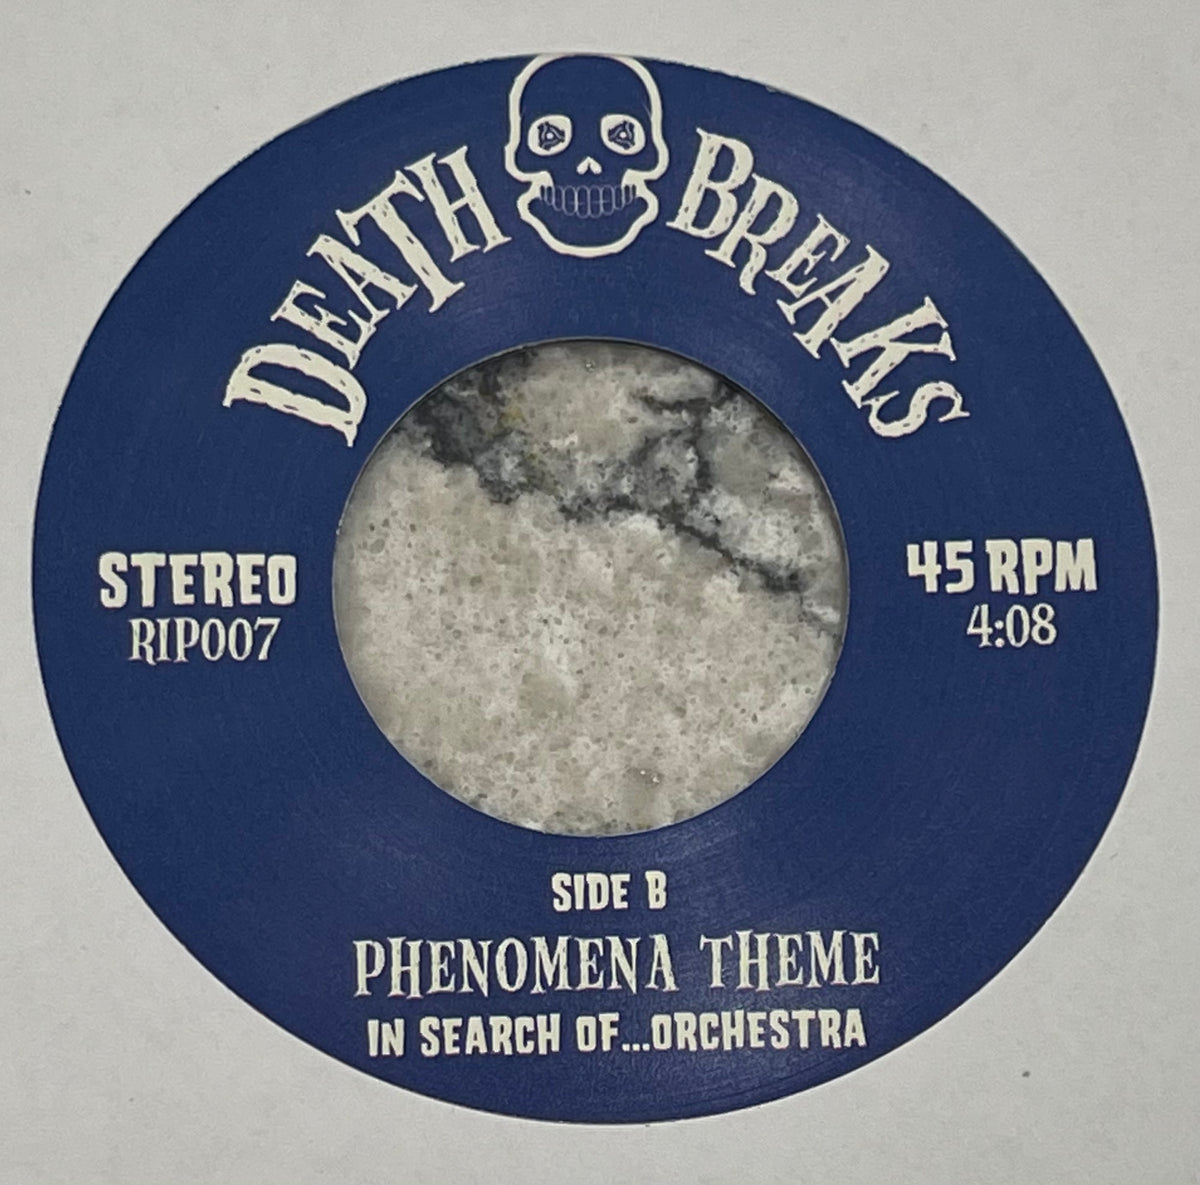 Death Breaks 7: King Errisson - Well Have A Nice Day b/w In Search Of...Orchestra - Phenomena Theme